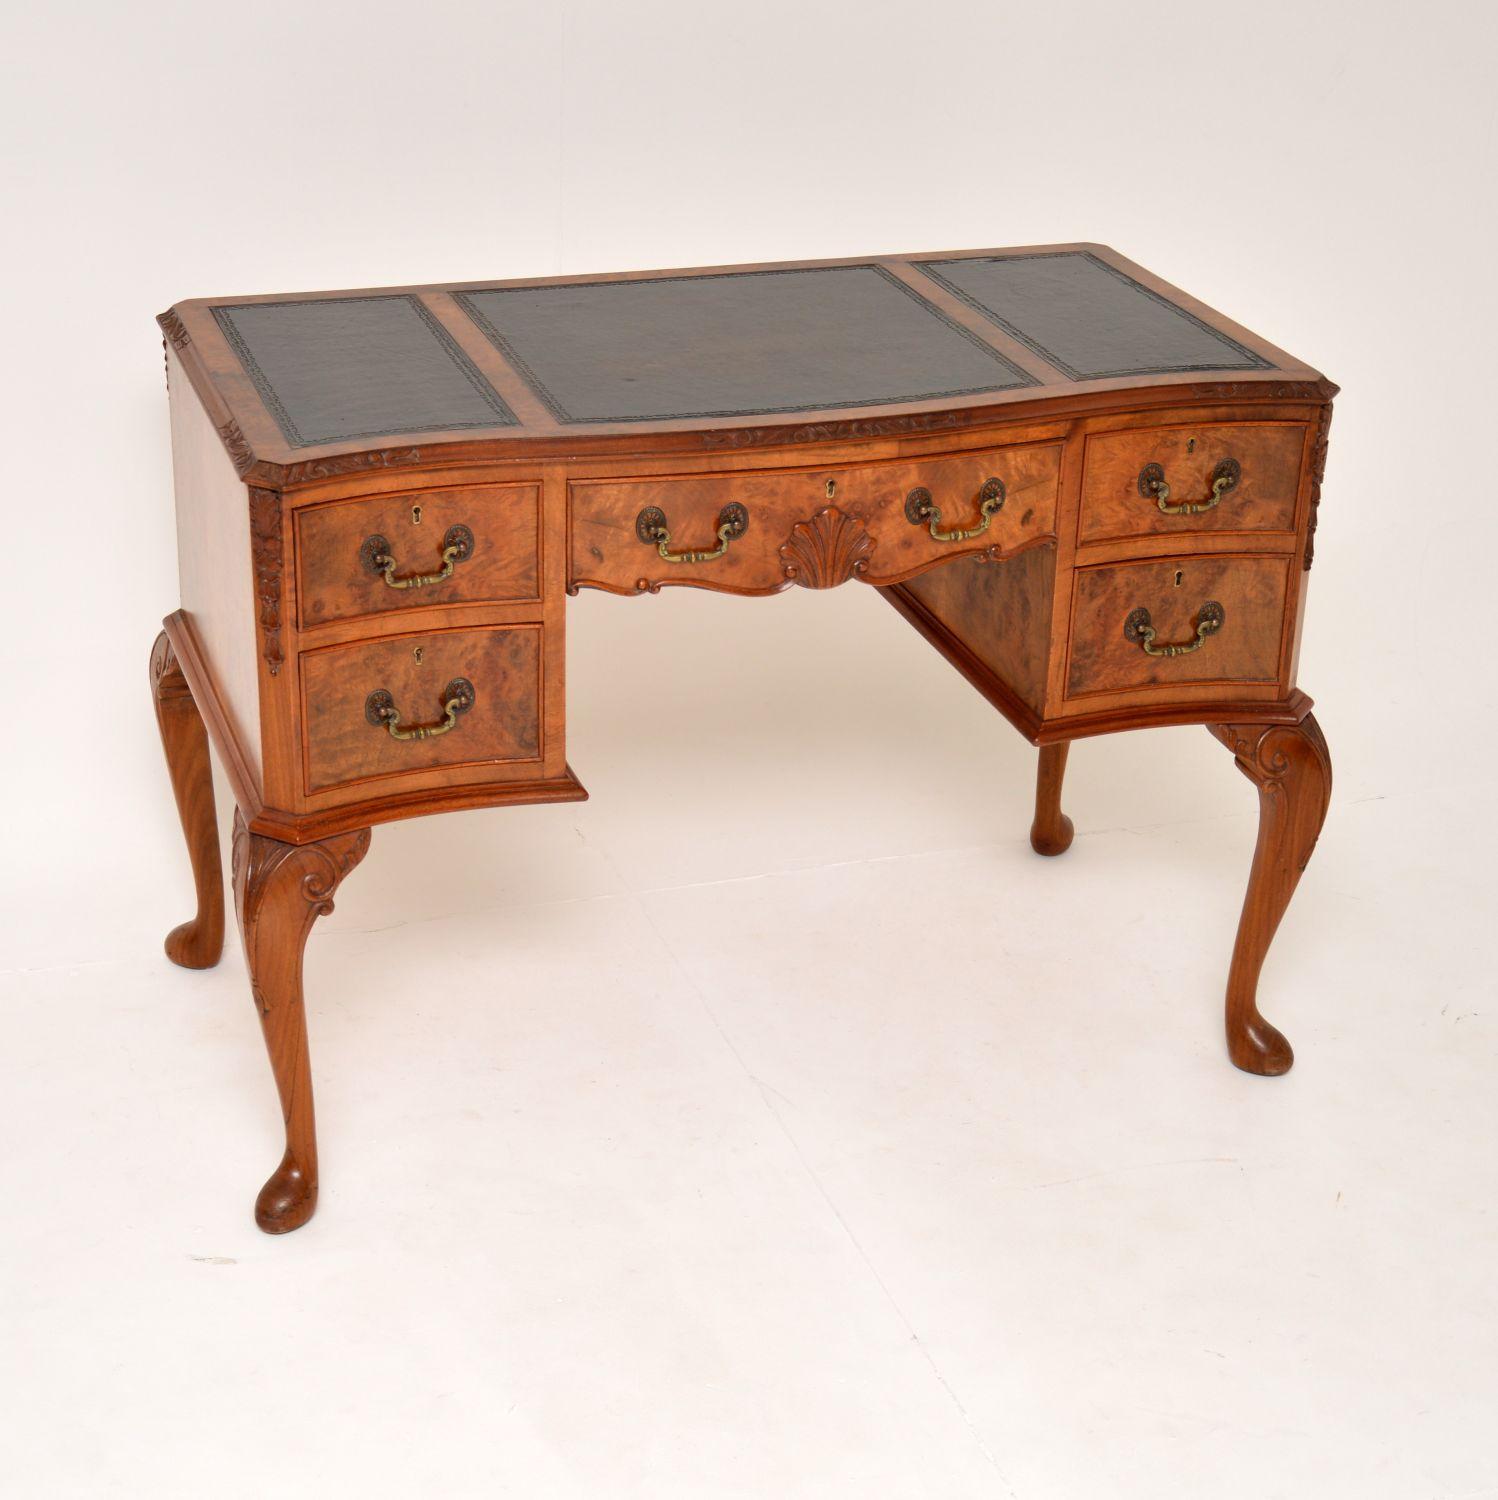 An excellent antique burr walnut writing desk of lovely proportions. This was made in England, it dates from around the 1900-1920’s. The quality is outstanding, this has absolutely gorgeous burr walnut grain patterns throughout, even on the back.